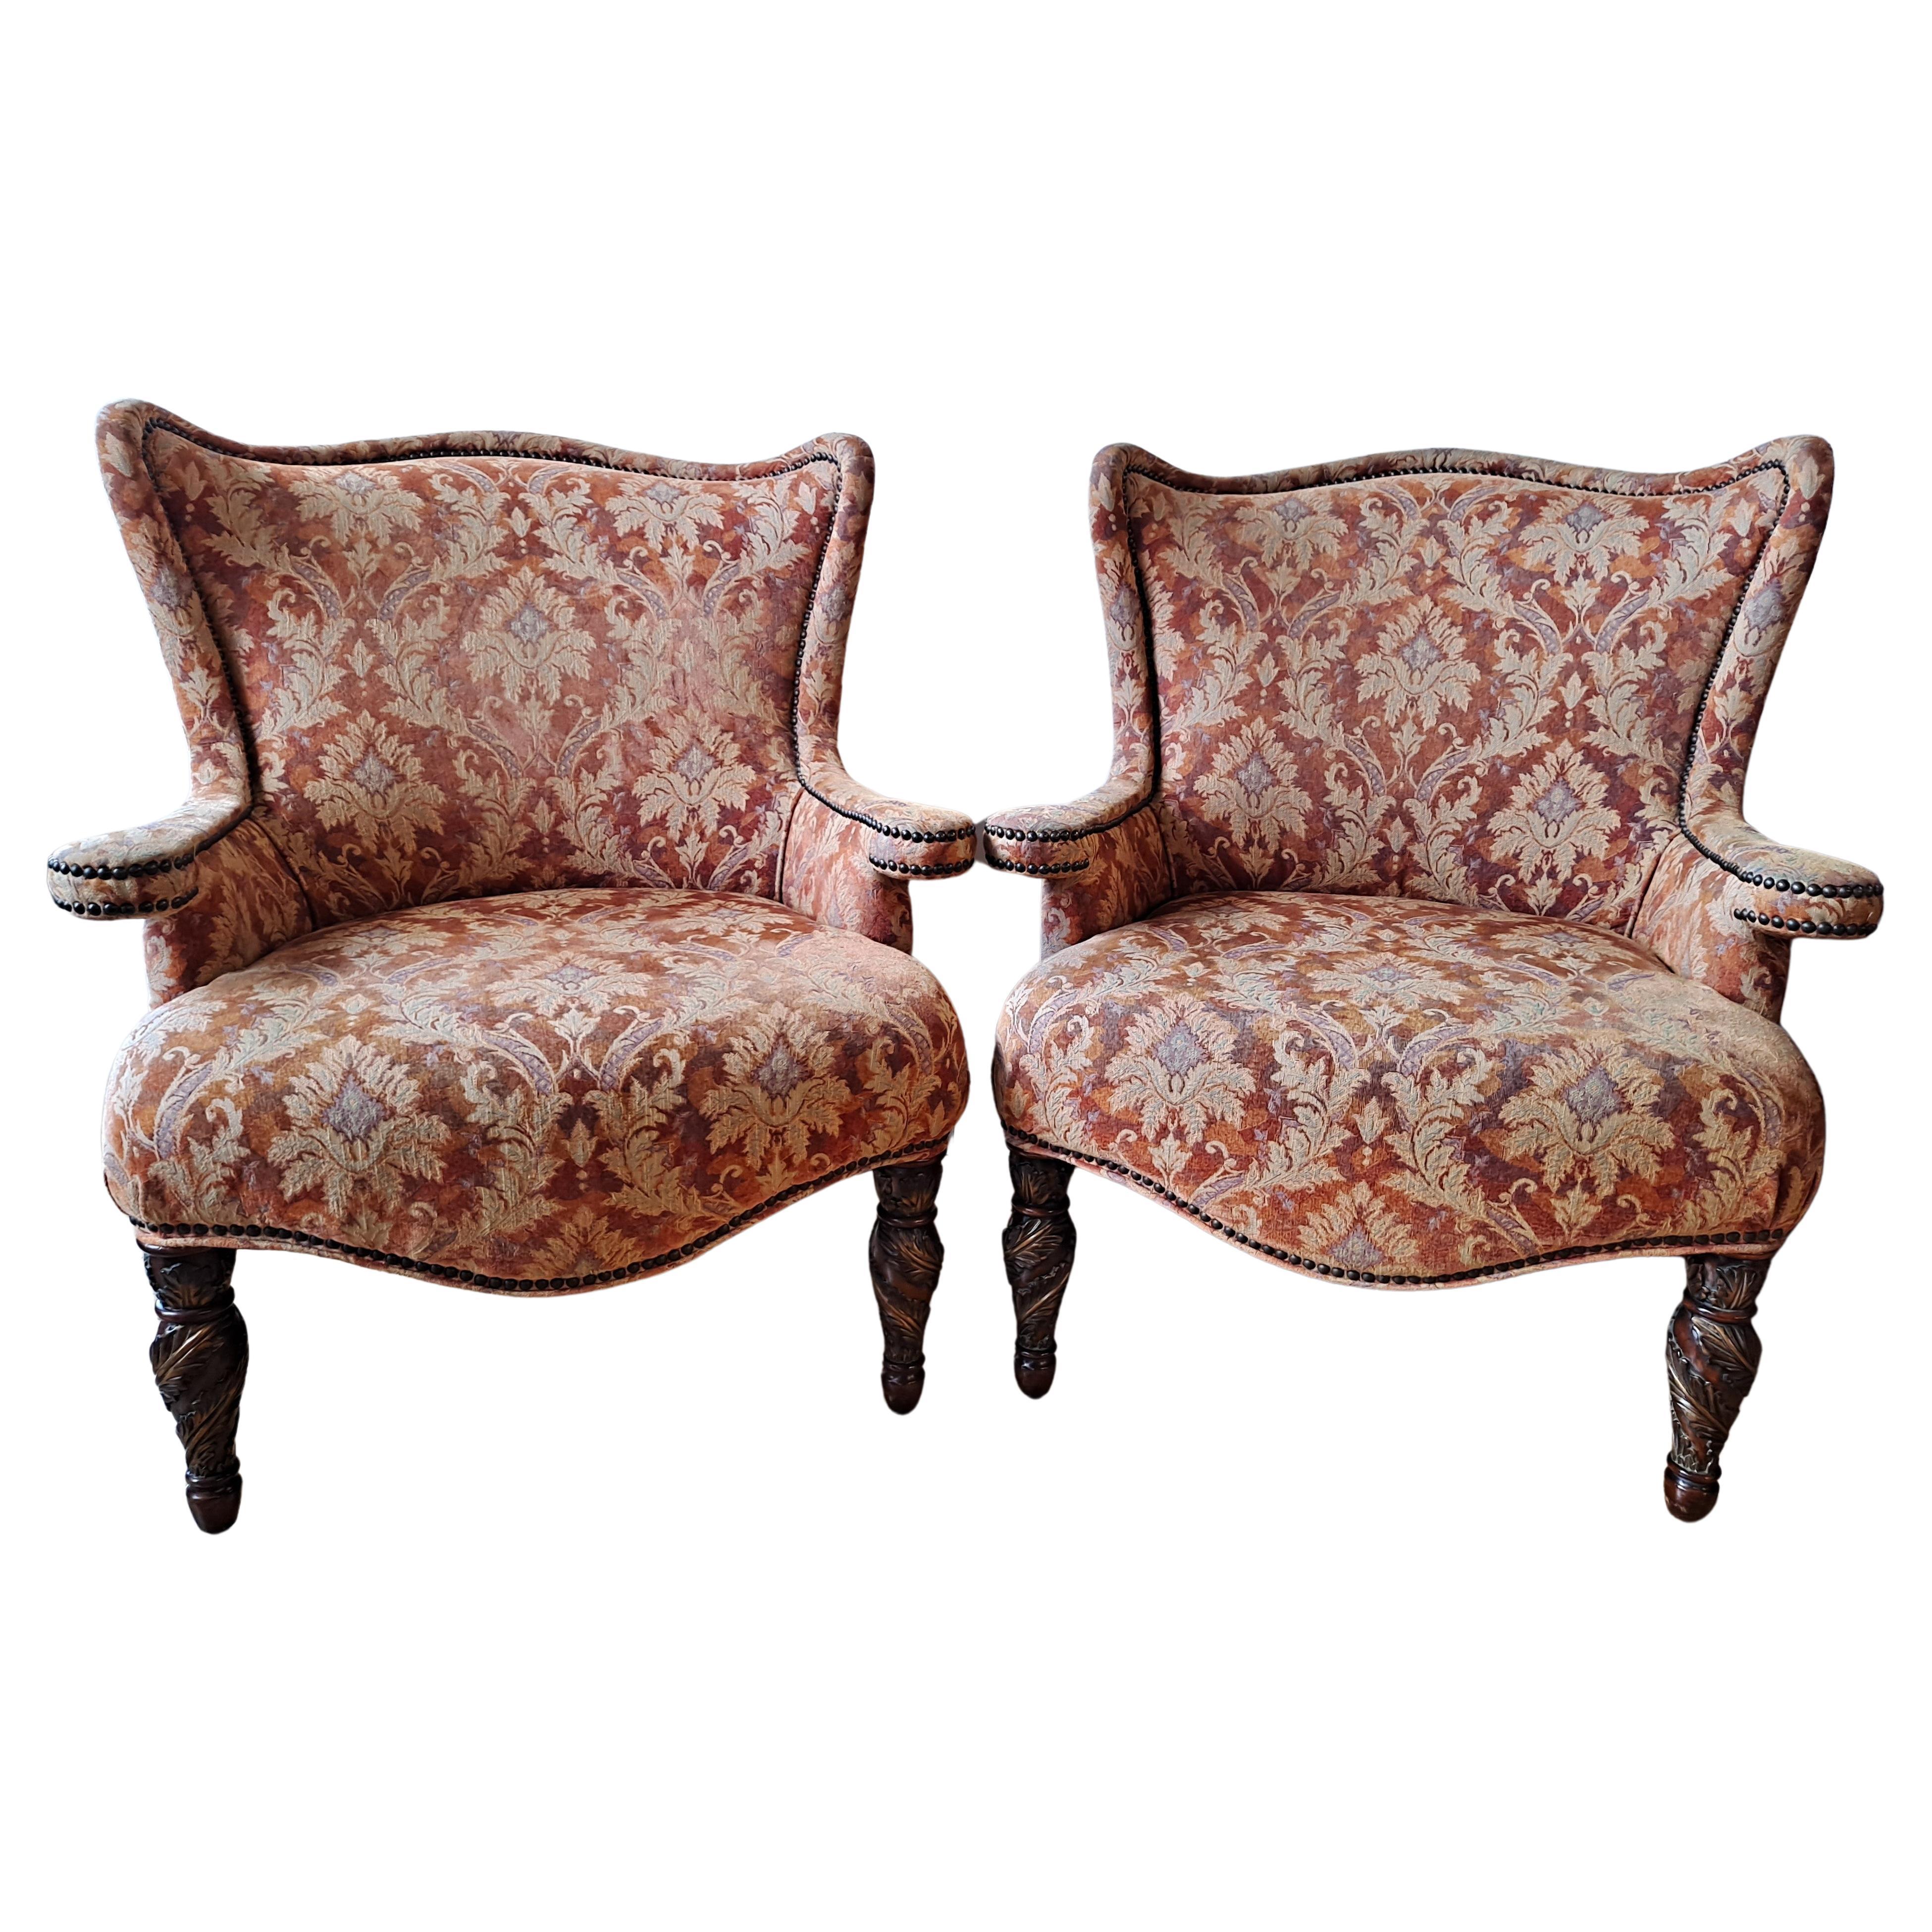 Pair of Michael Amini Wing-Back Armchairs w/Damask Pattern Upholstery For Sale